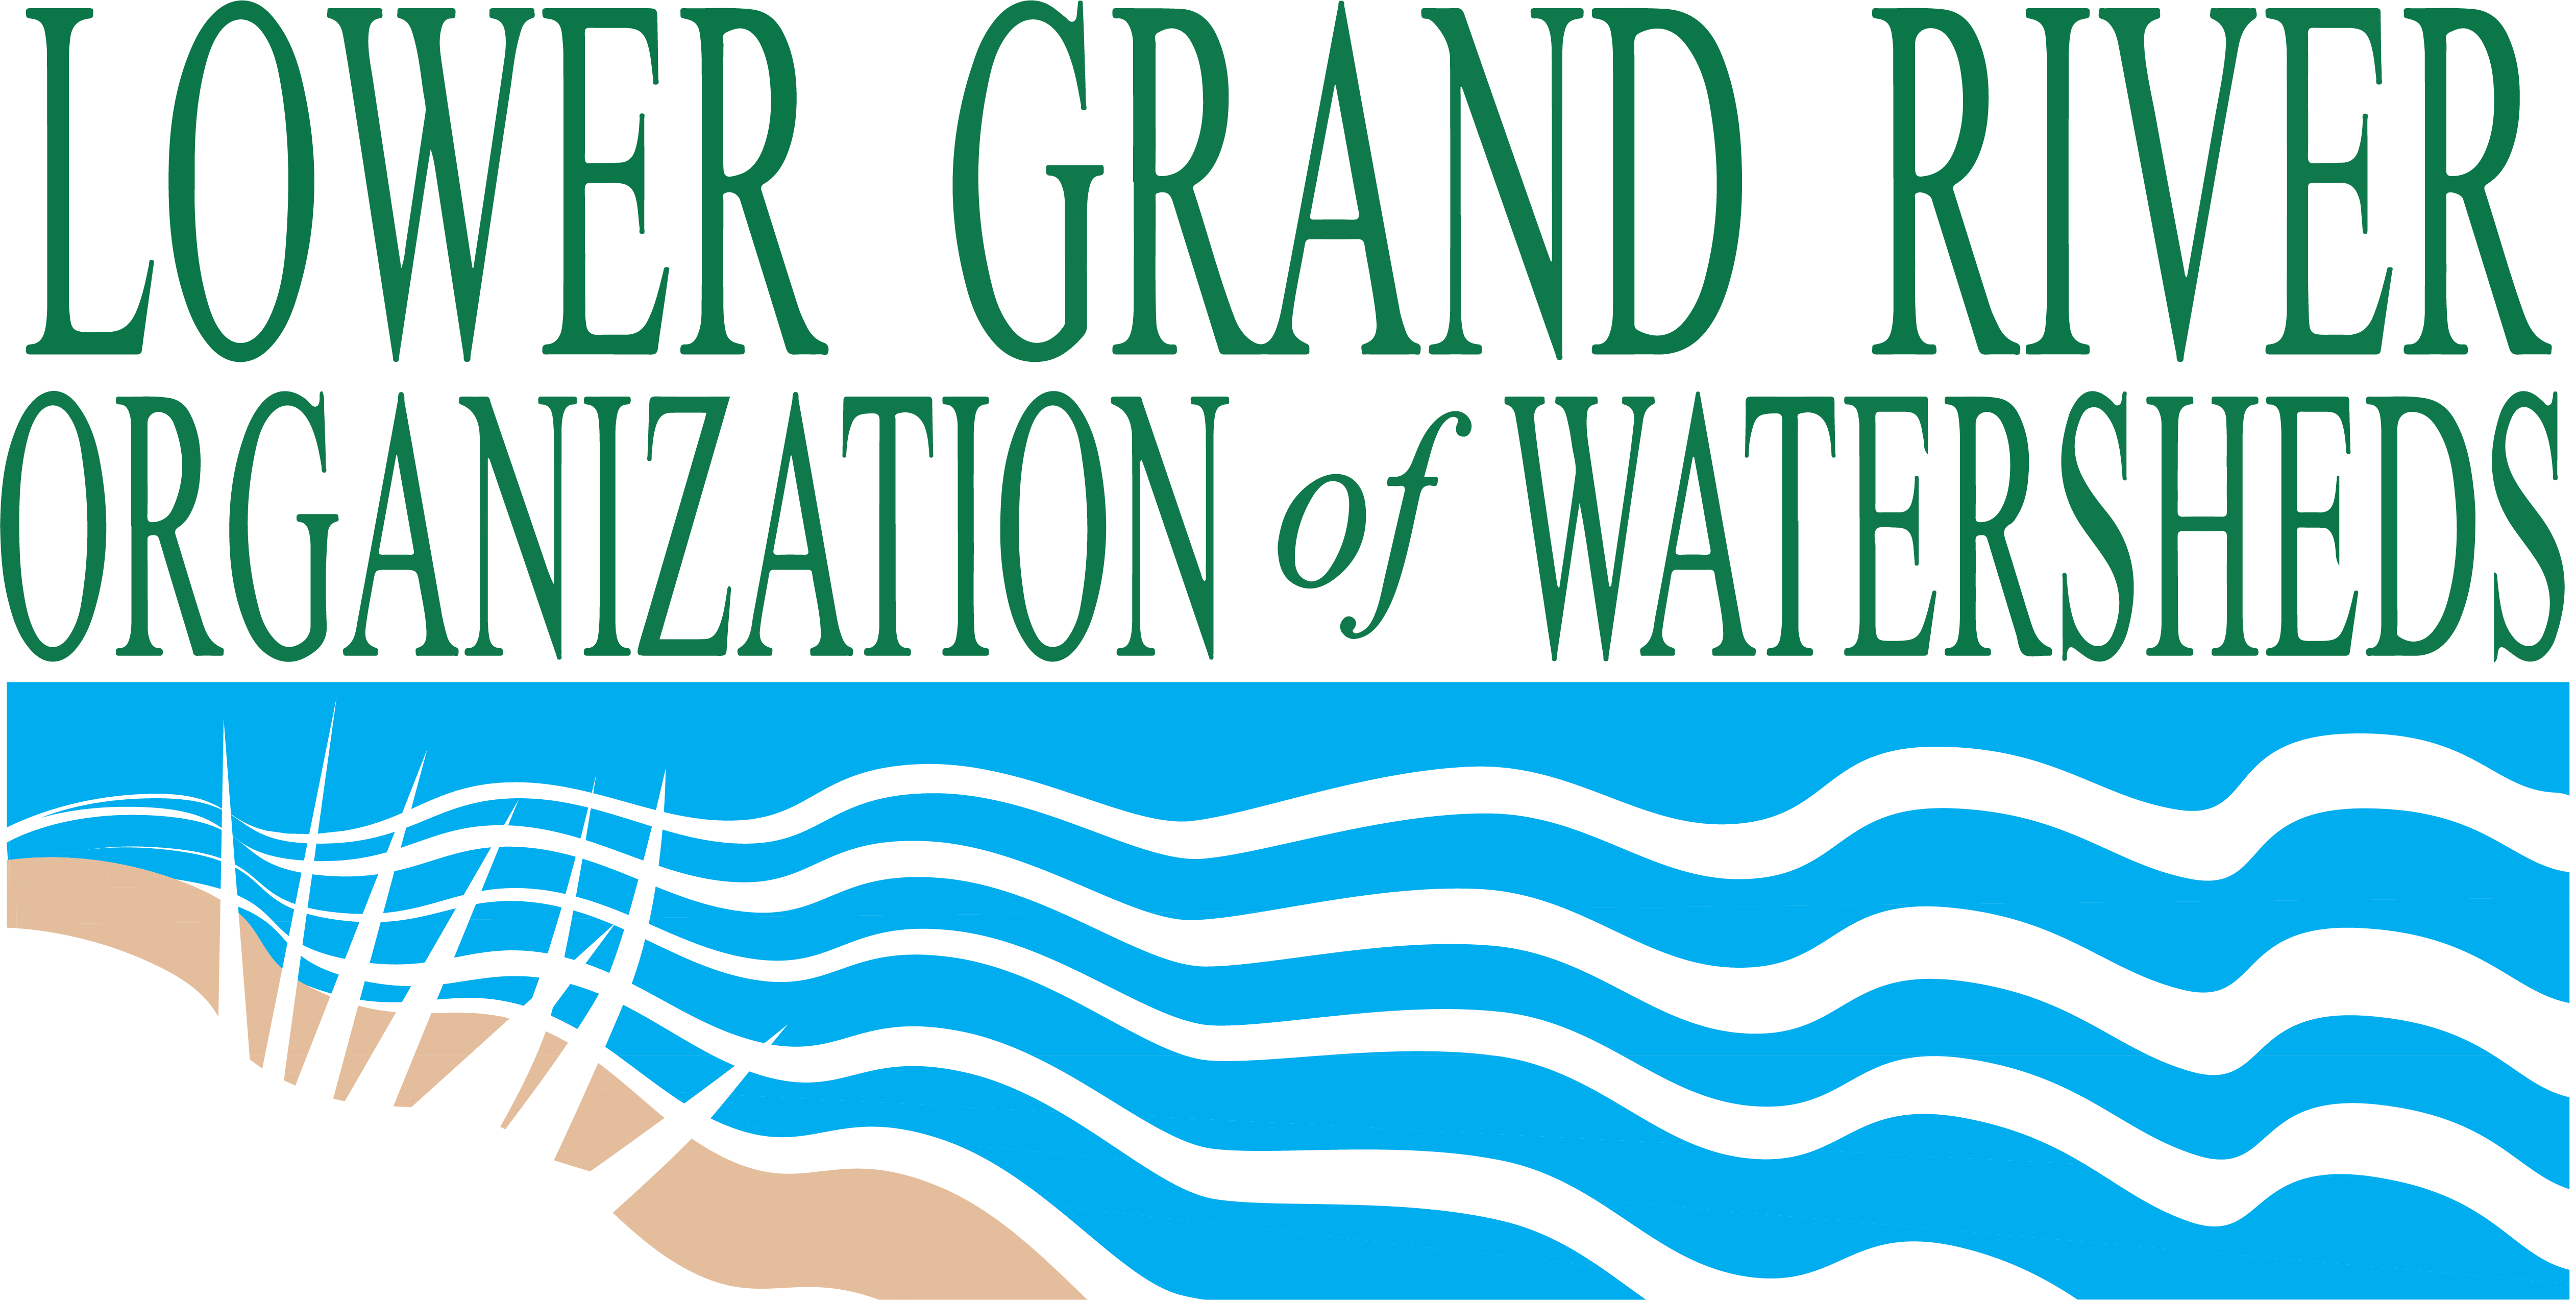 Lower Grand River Organization of Watersheds